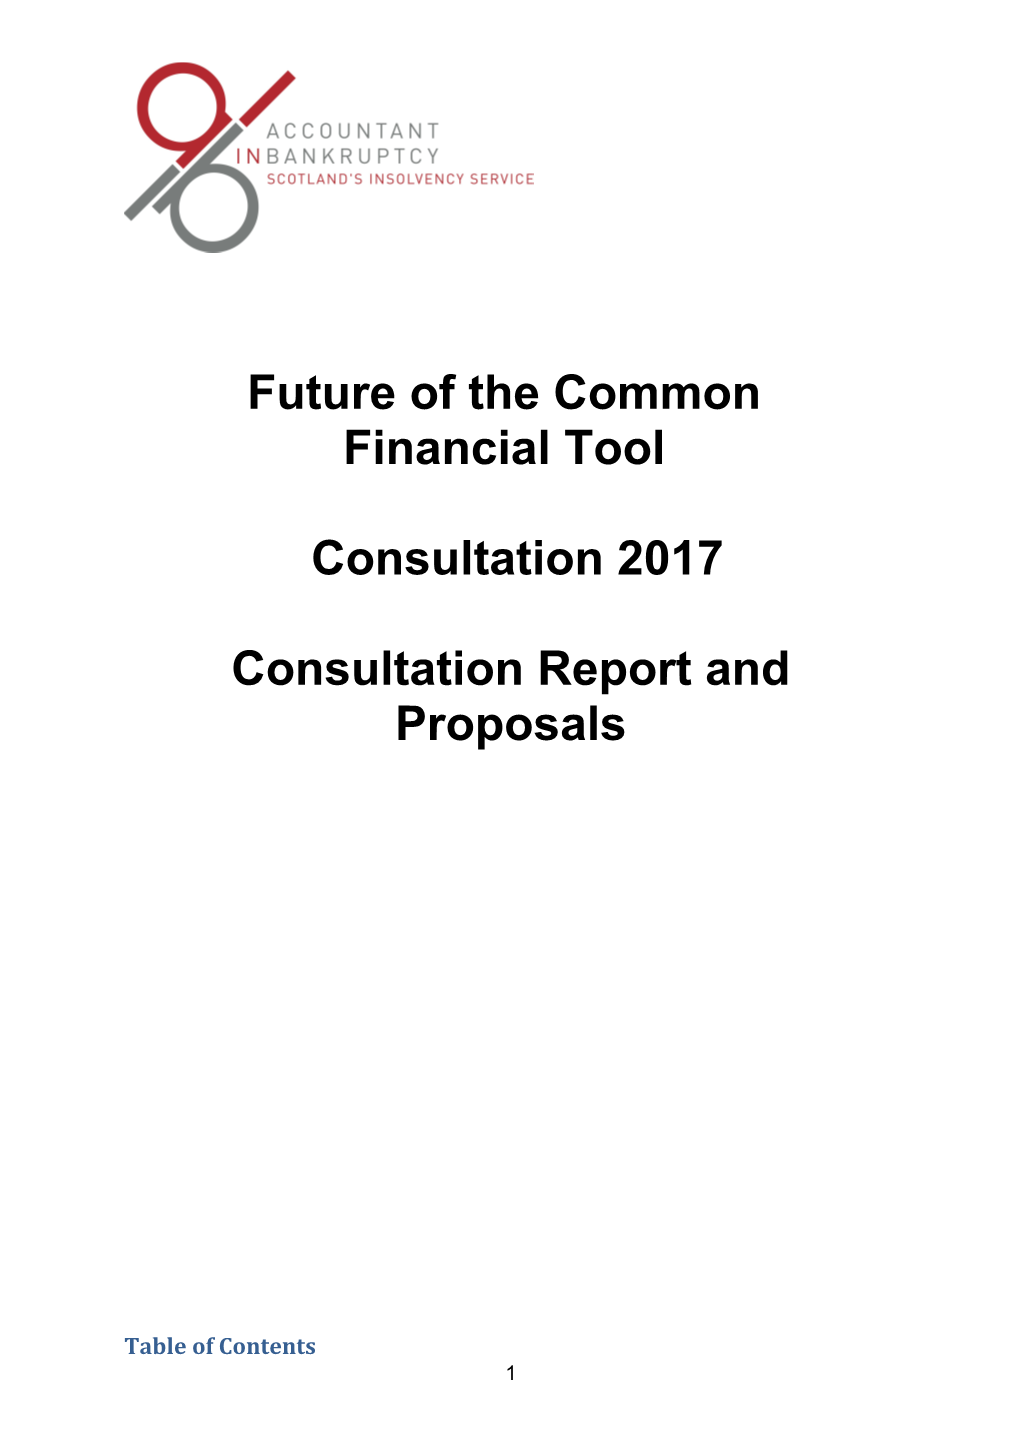 Future of the Common Financial Tool Consultation 2017